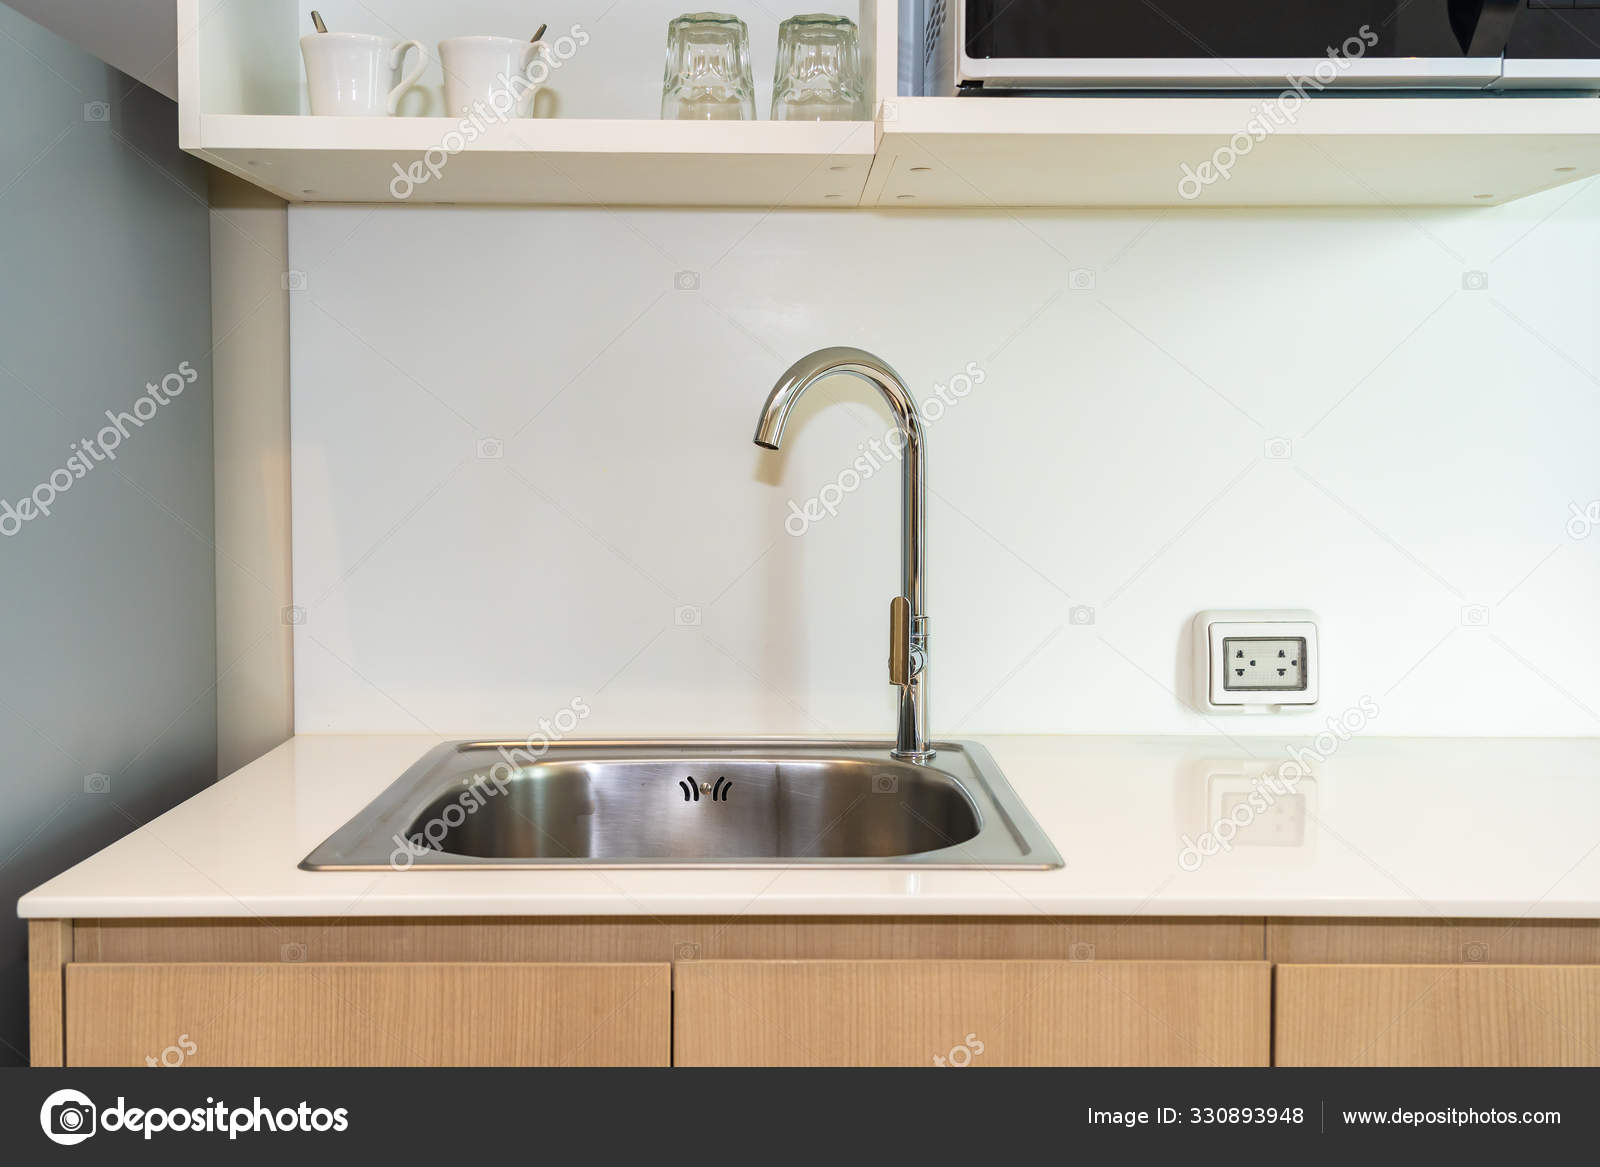 kitchen sink bent from opening and closing the faucet